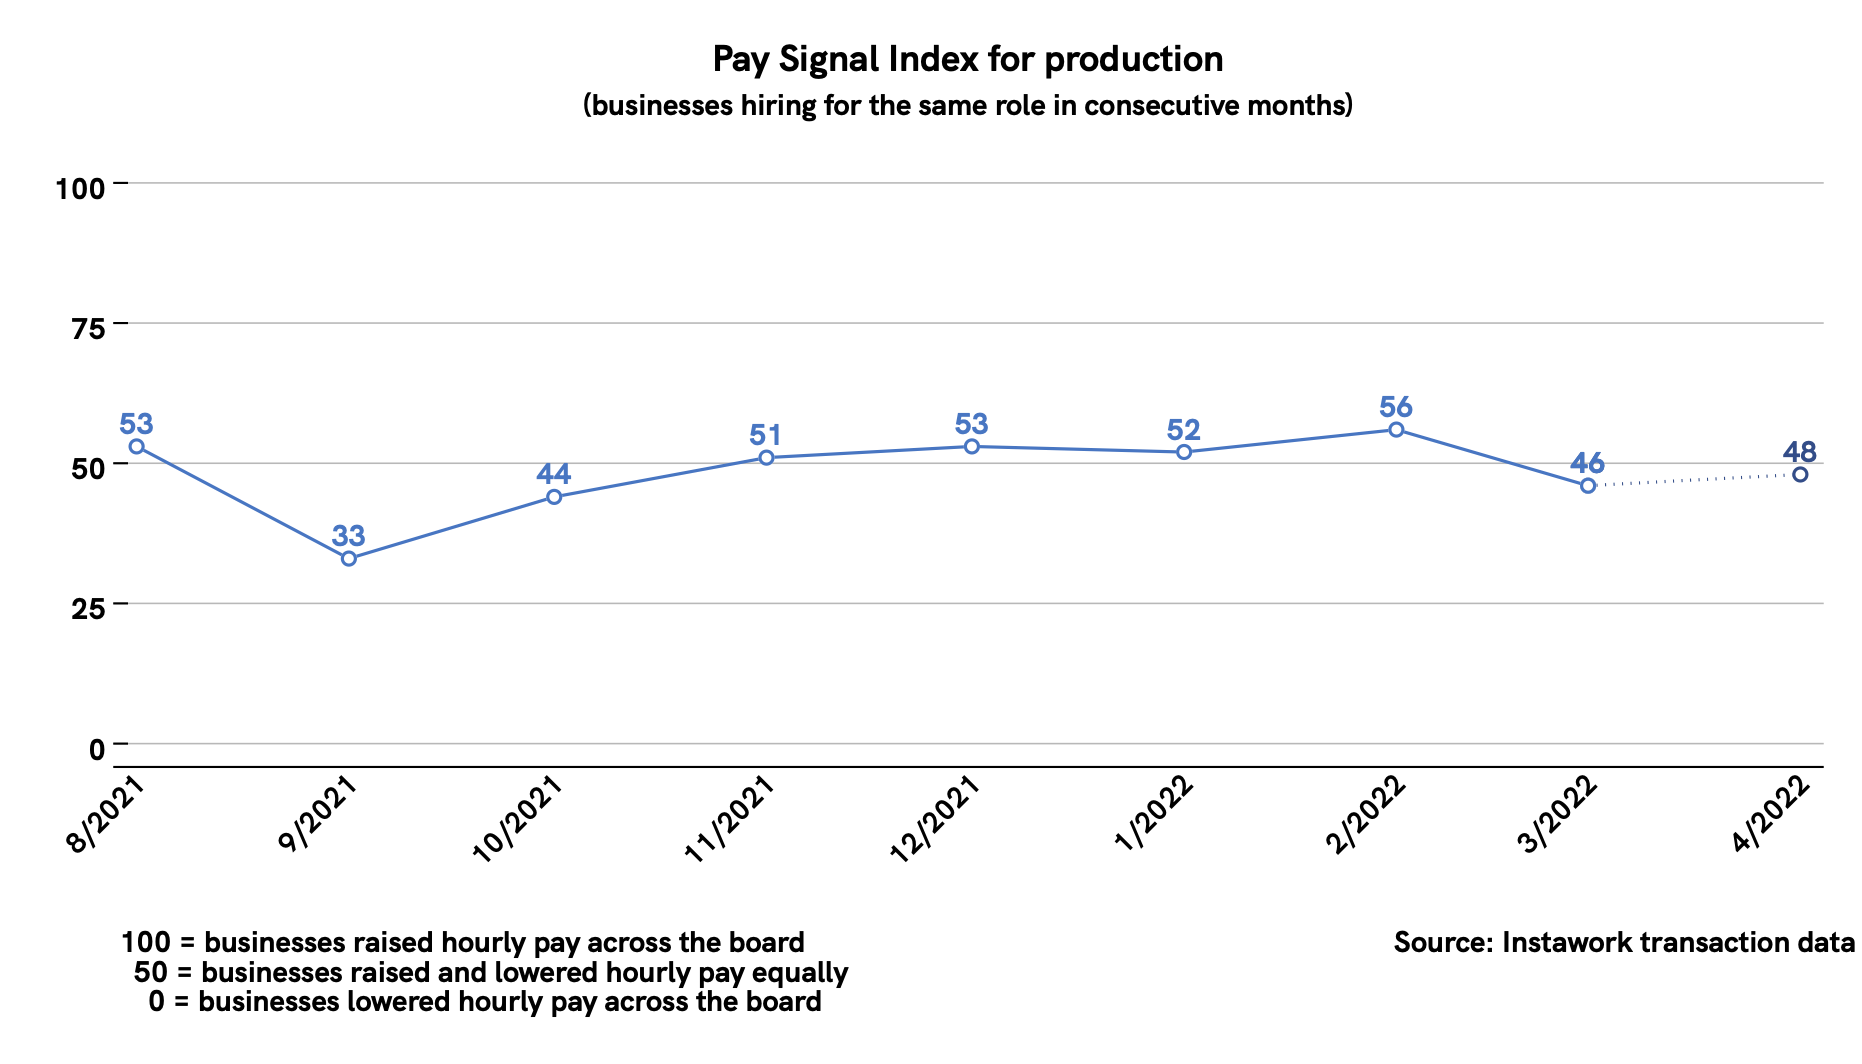 28 Mar 2022 Pay Signal Index for production